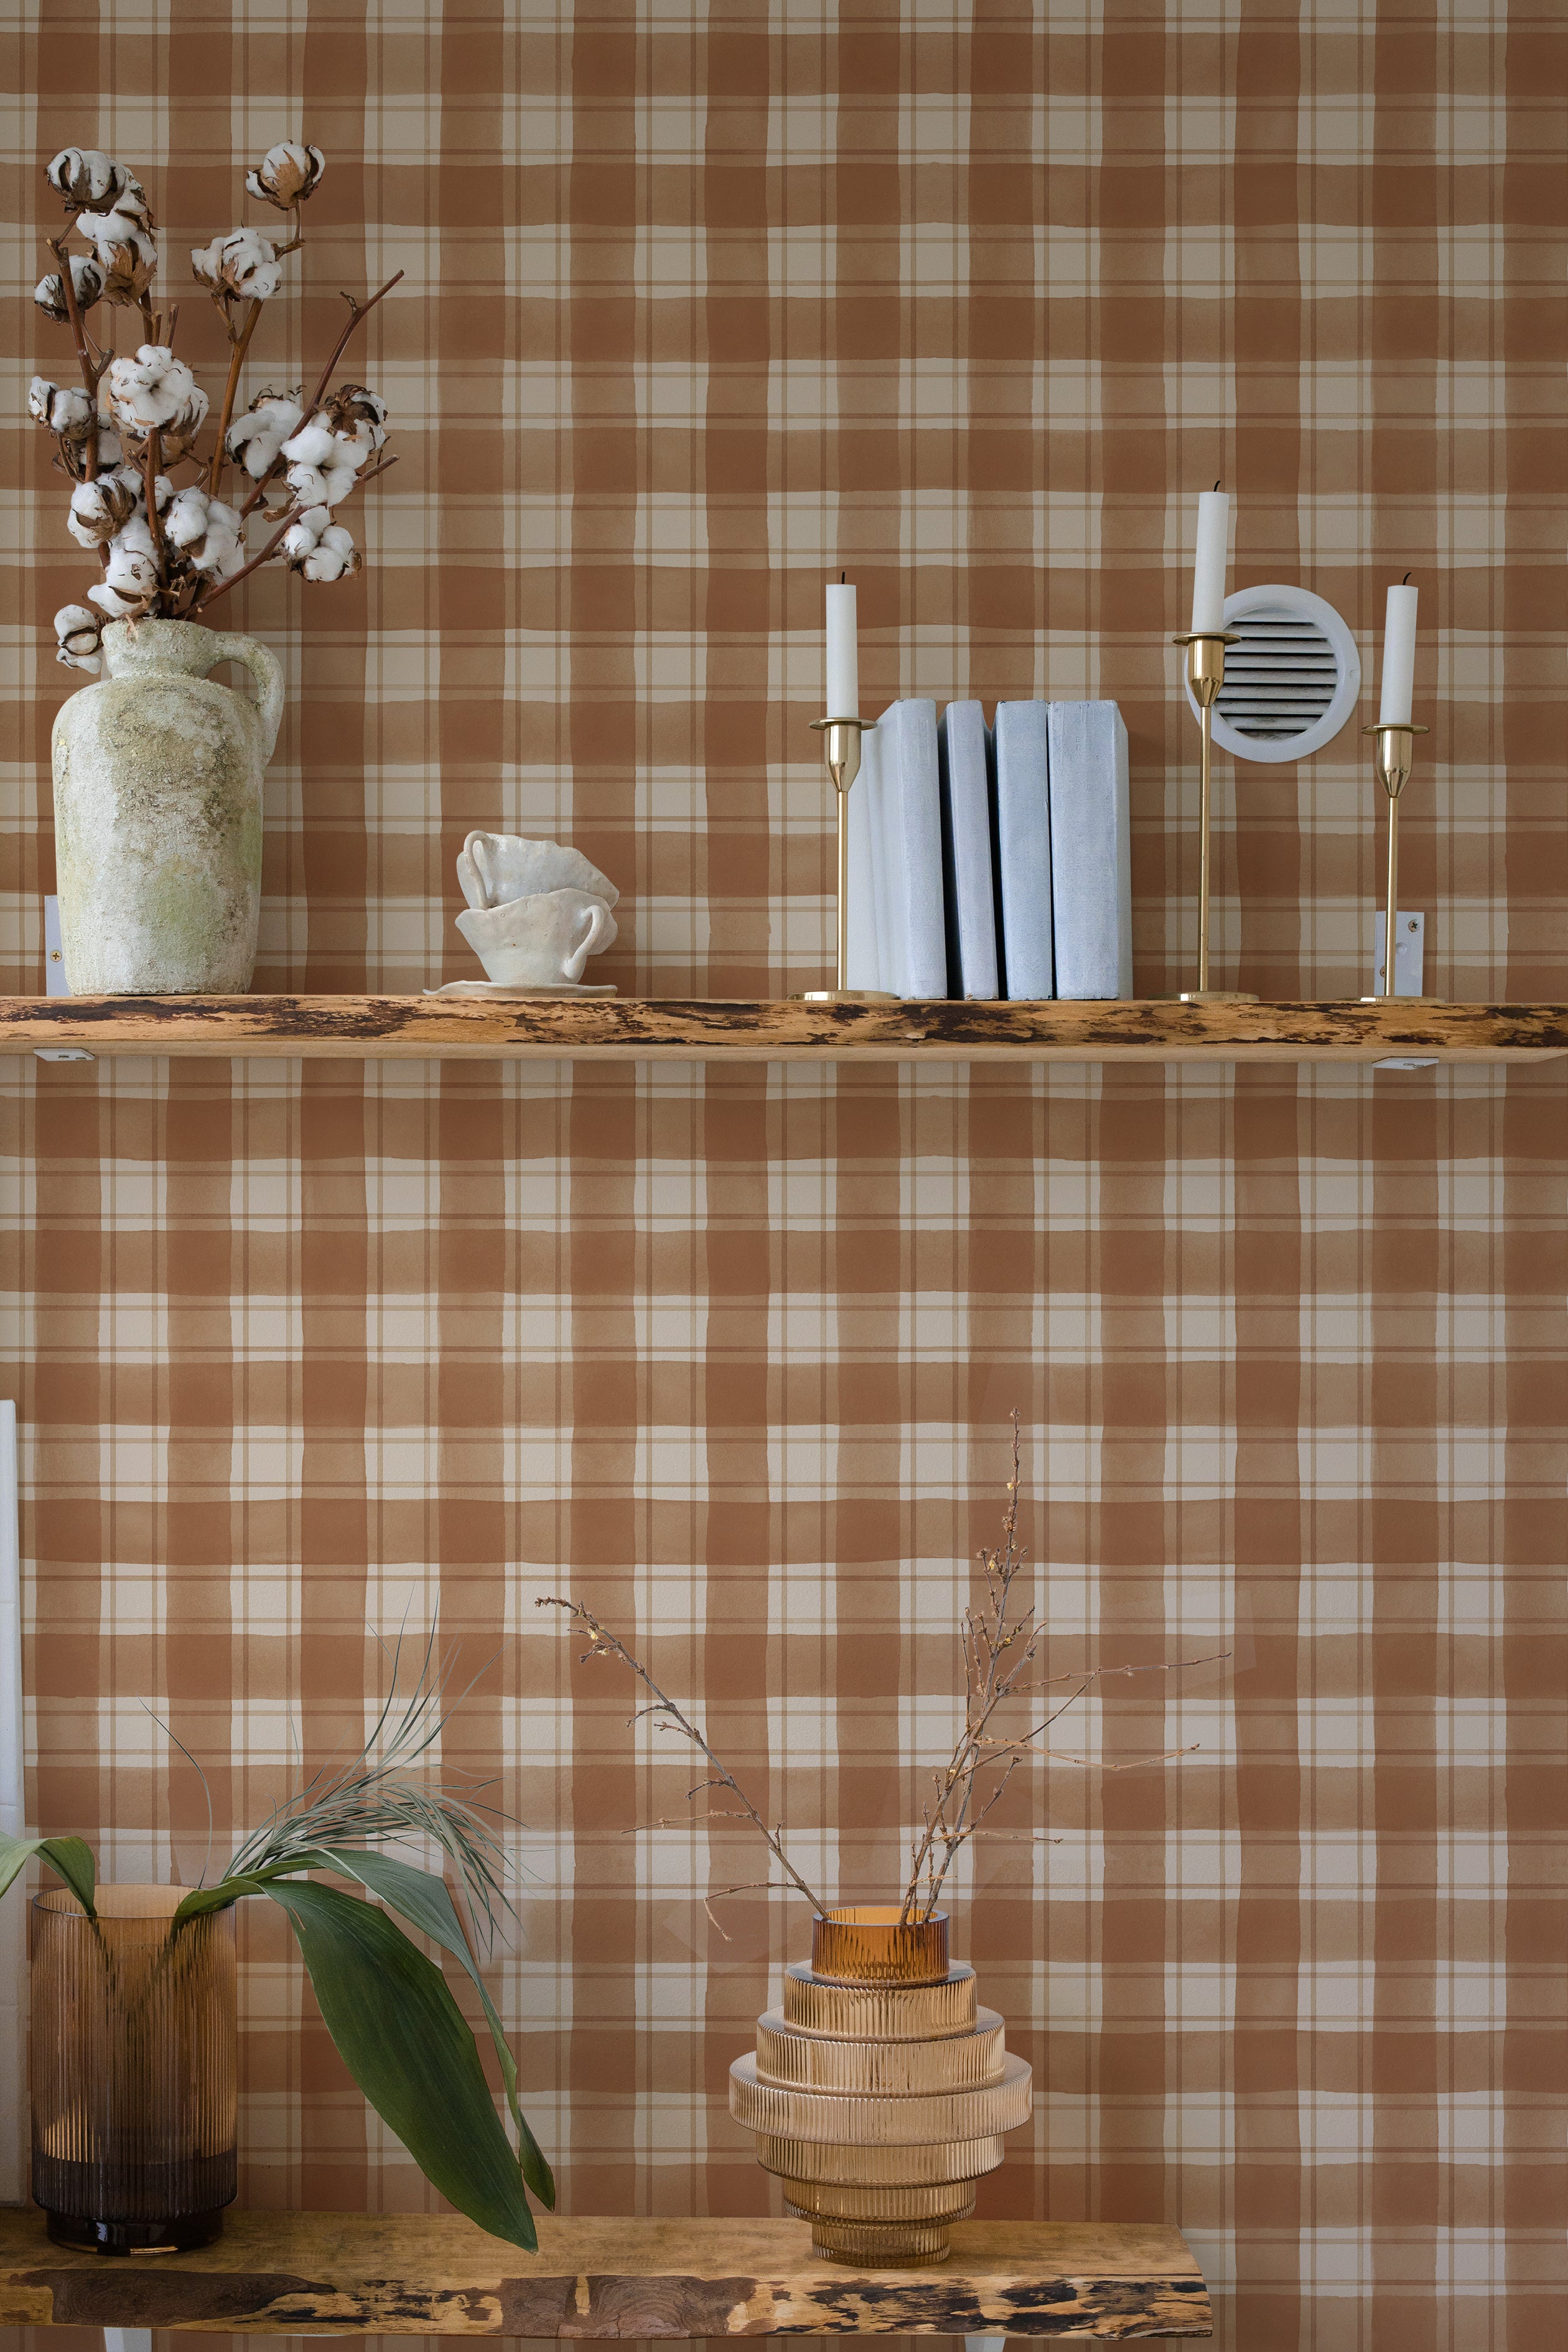 An elegantly styled home interior with a rust-colored buffalo check pattern wall. Decor includes a ceramic vase with cotton branches, candle holders, and neatly stacked books on a wooden shelf.